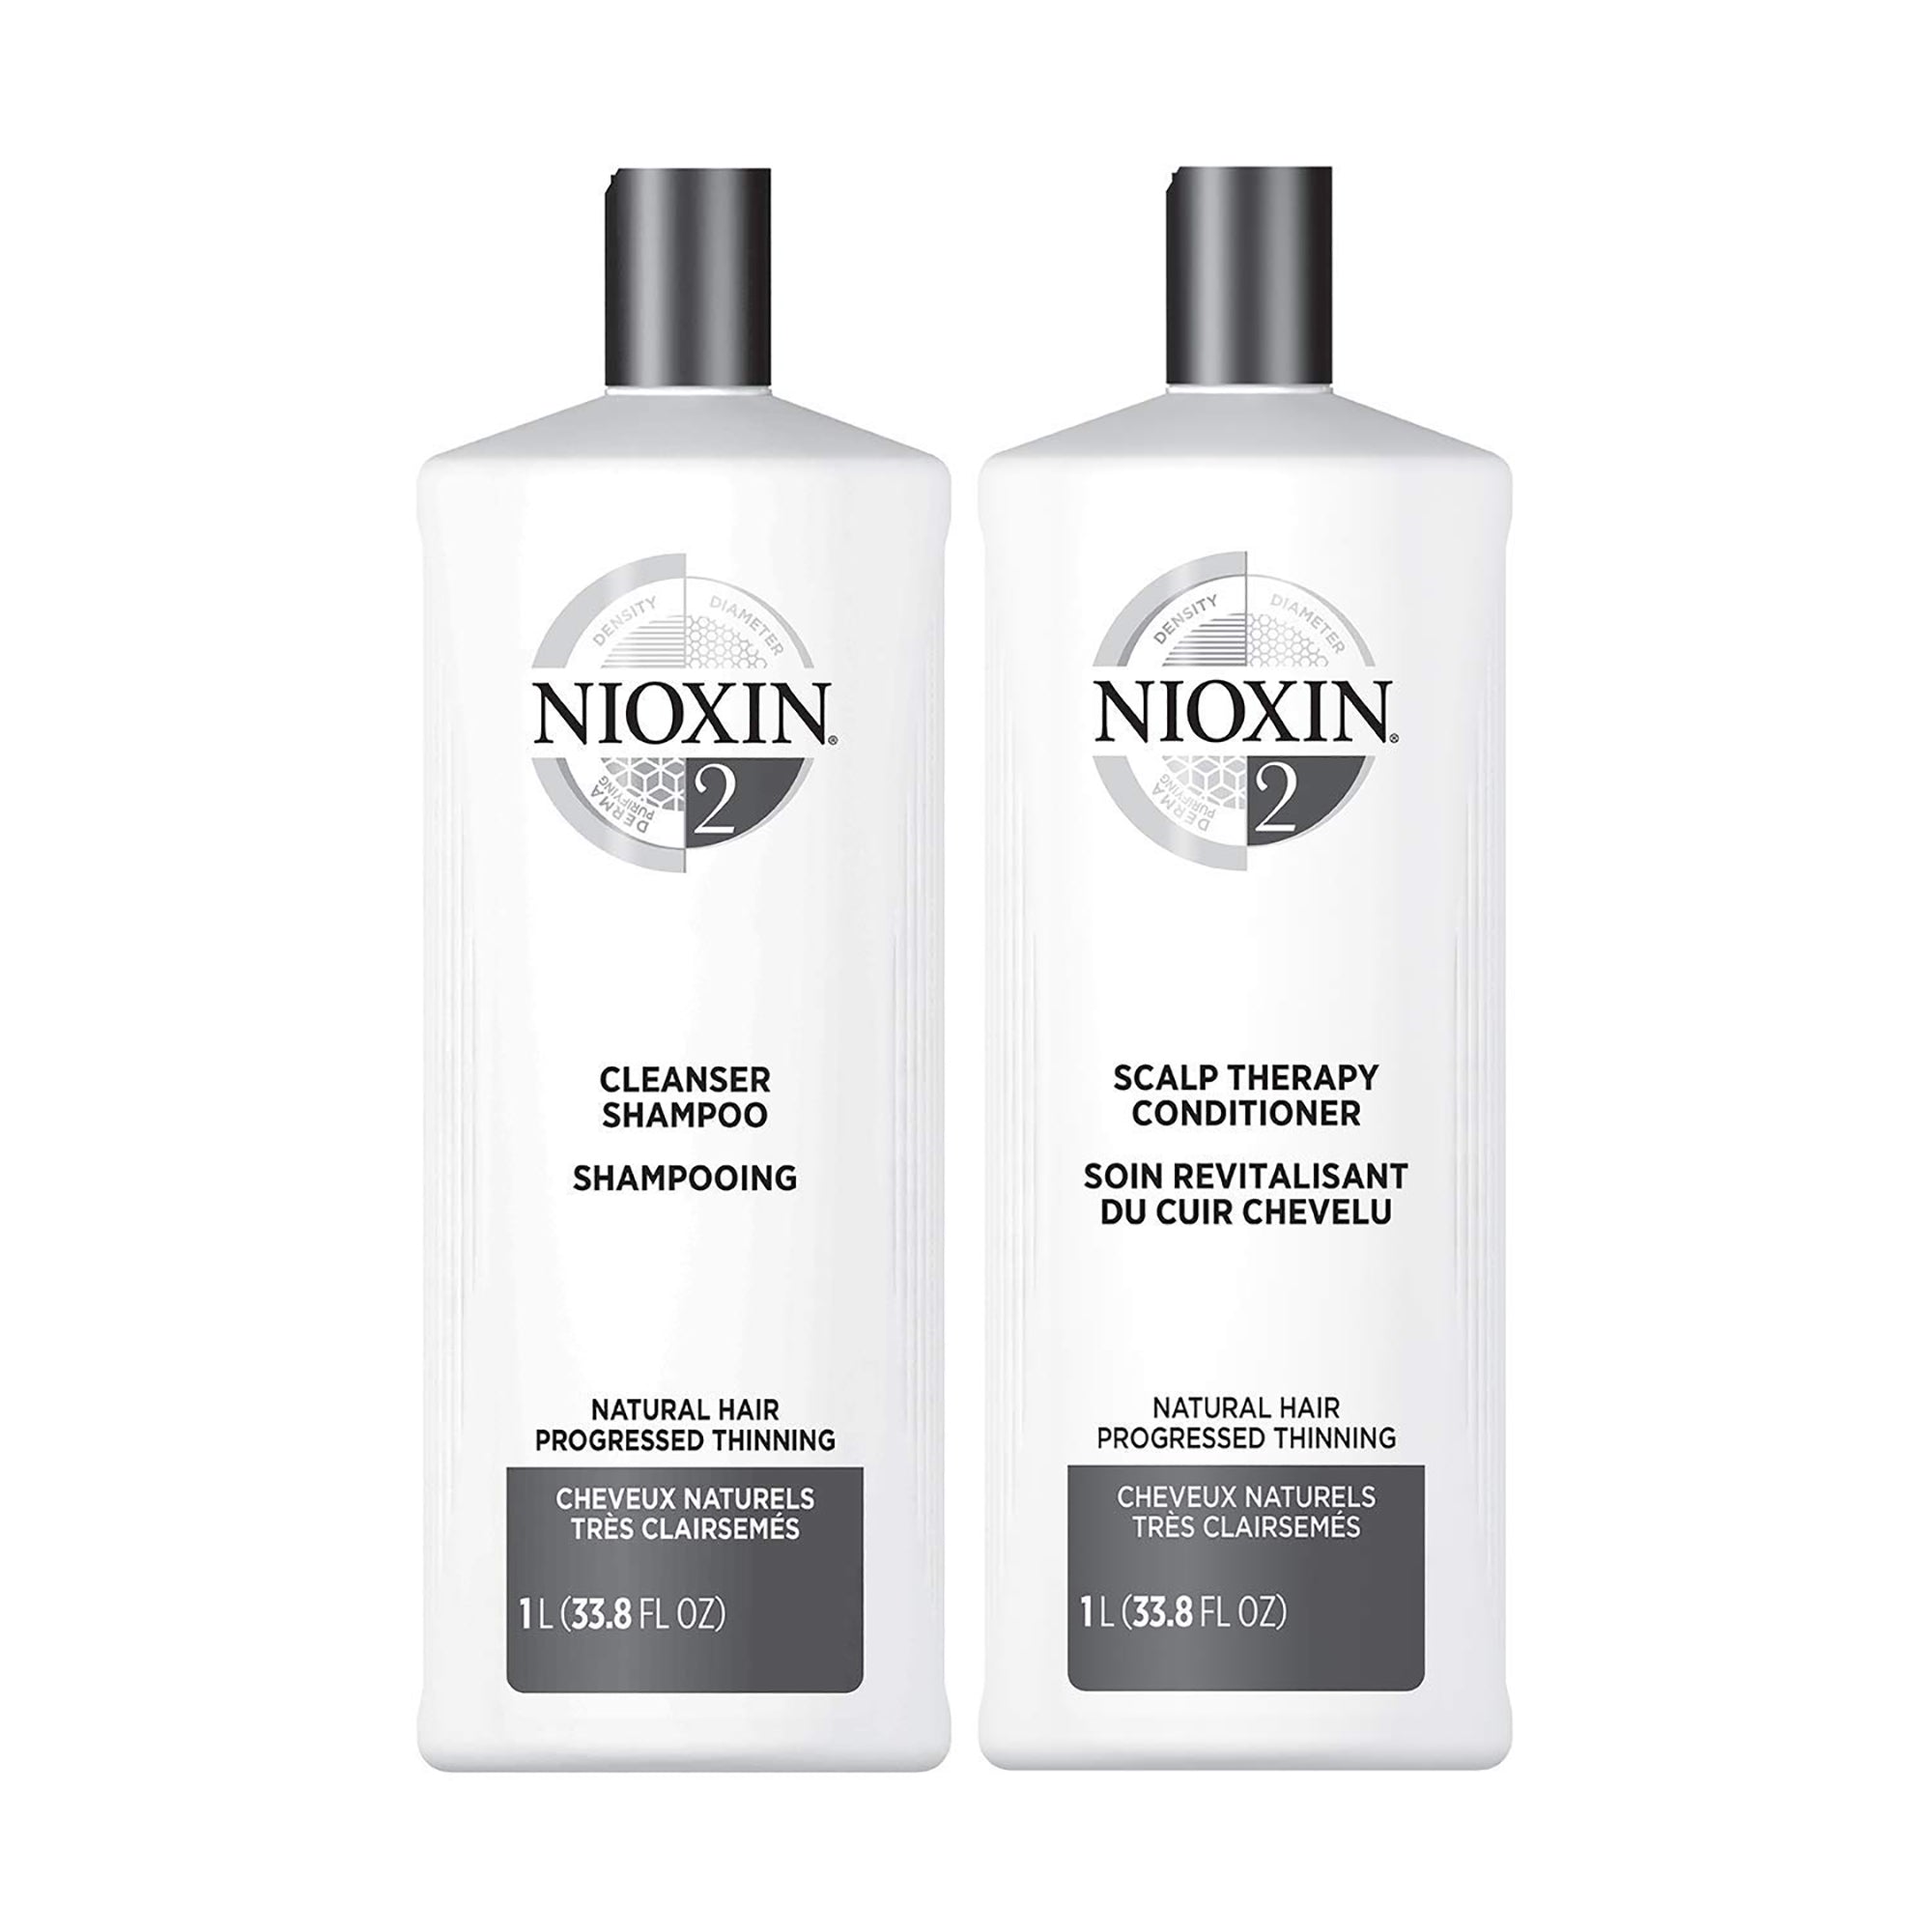 Nioxin System 2 Cleanser Shampoo & Scalp Therapy Conditioner Bundle ($104 Value) / 33.OZ